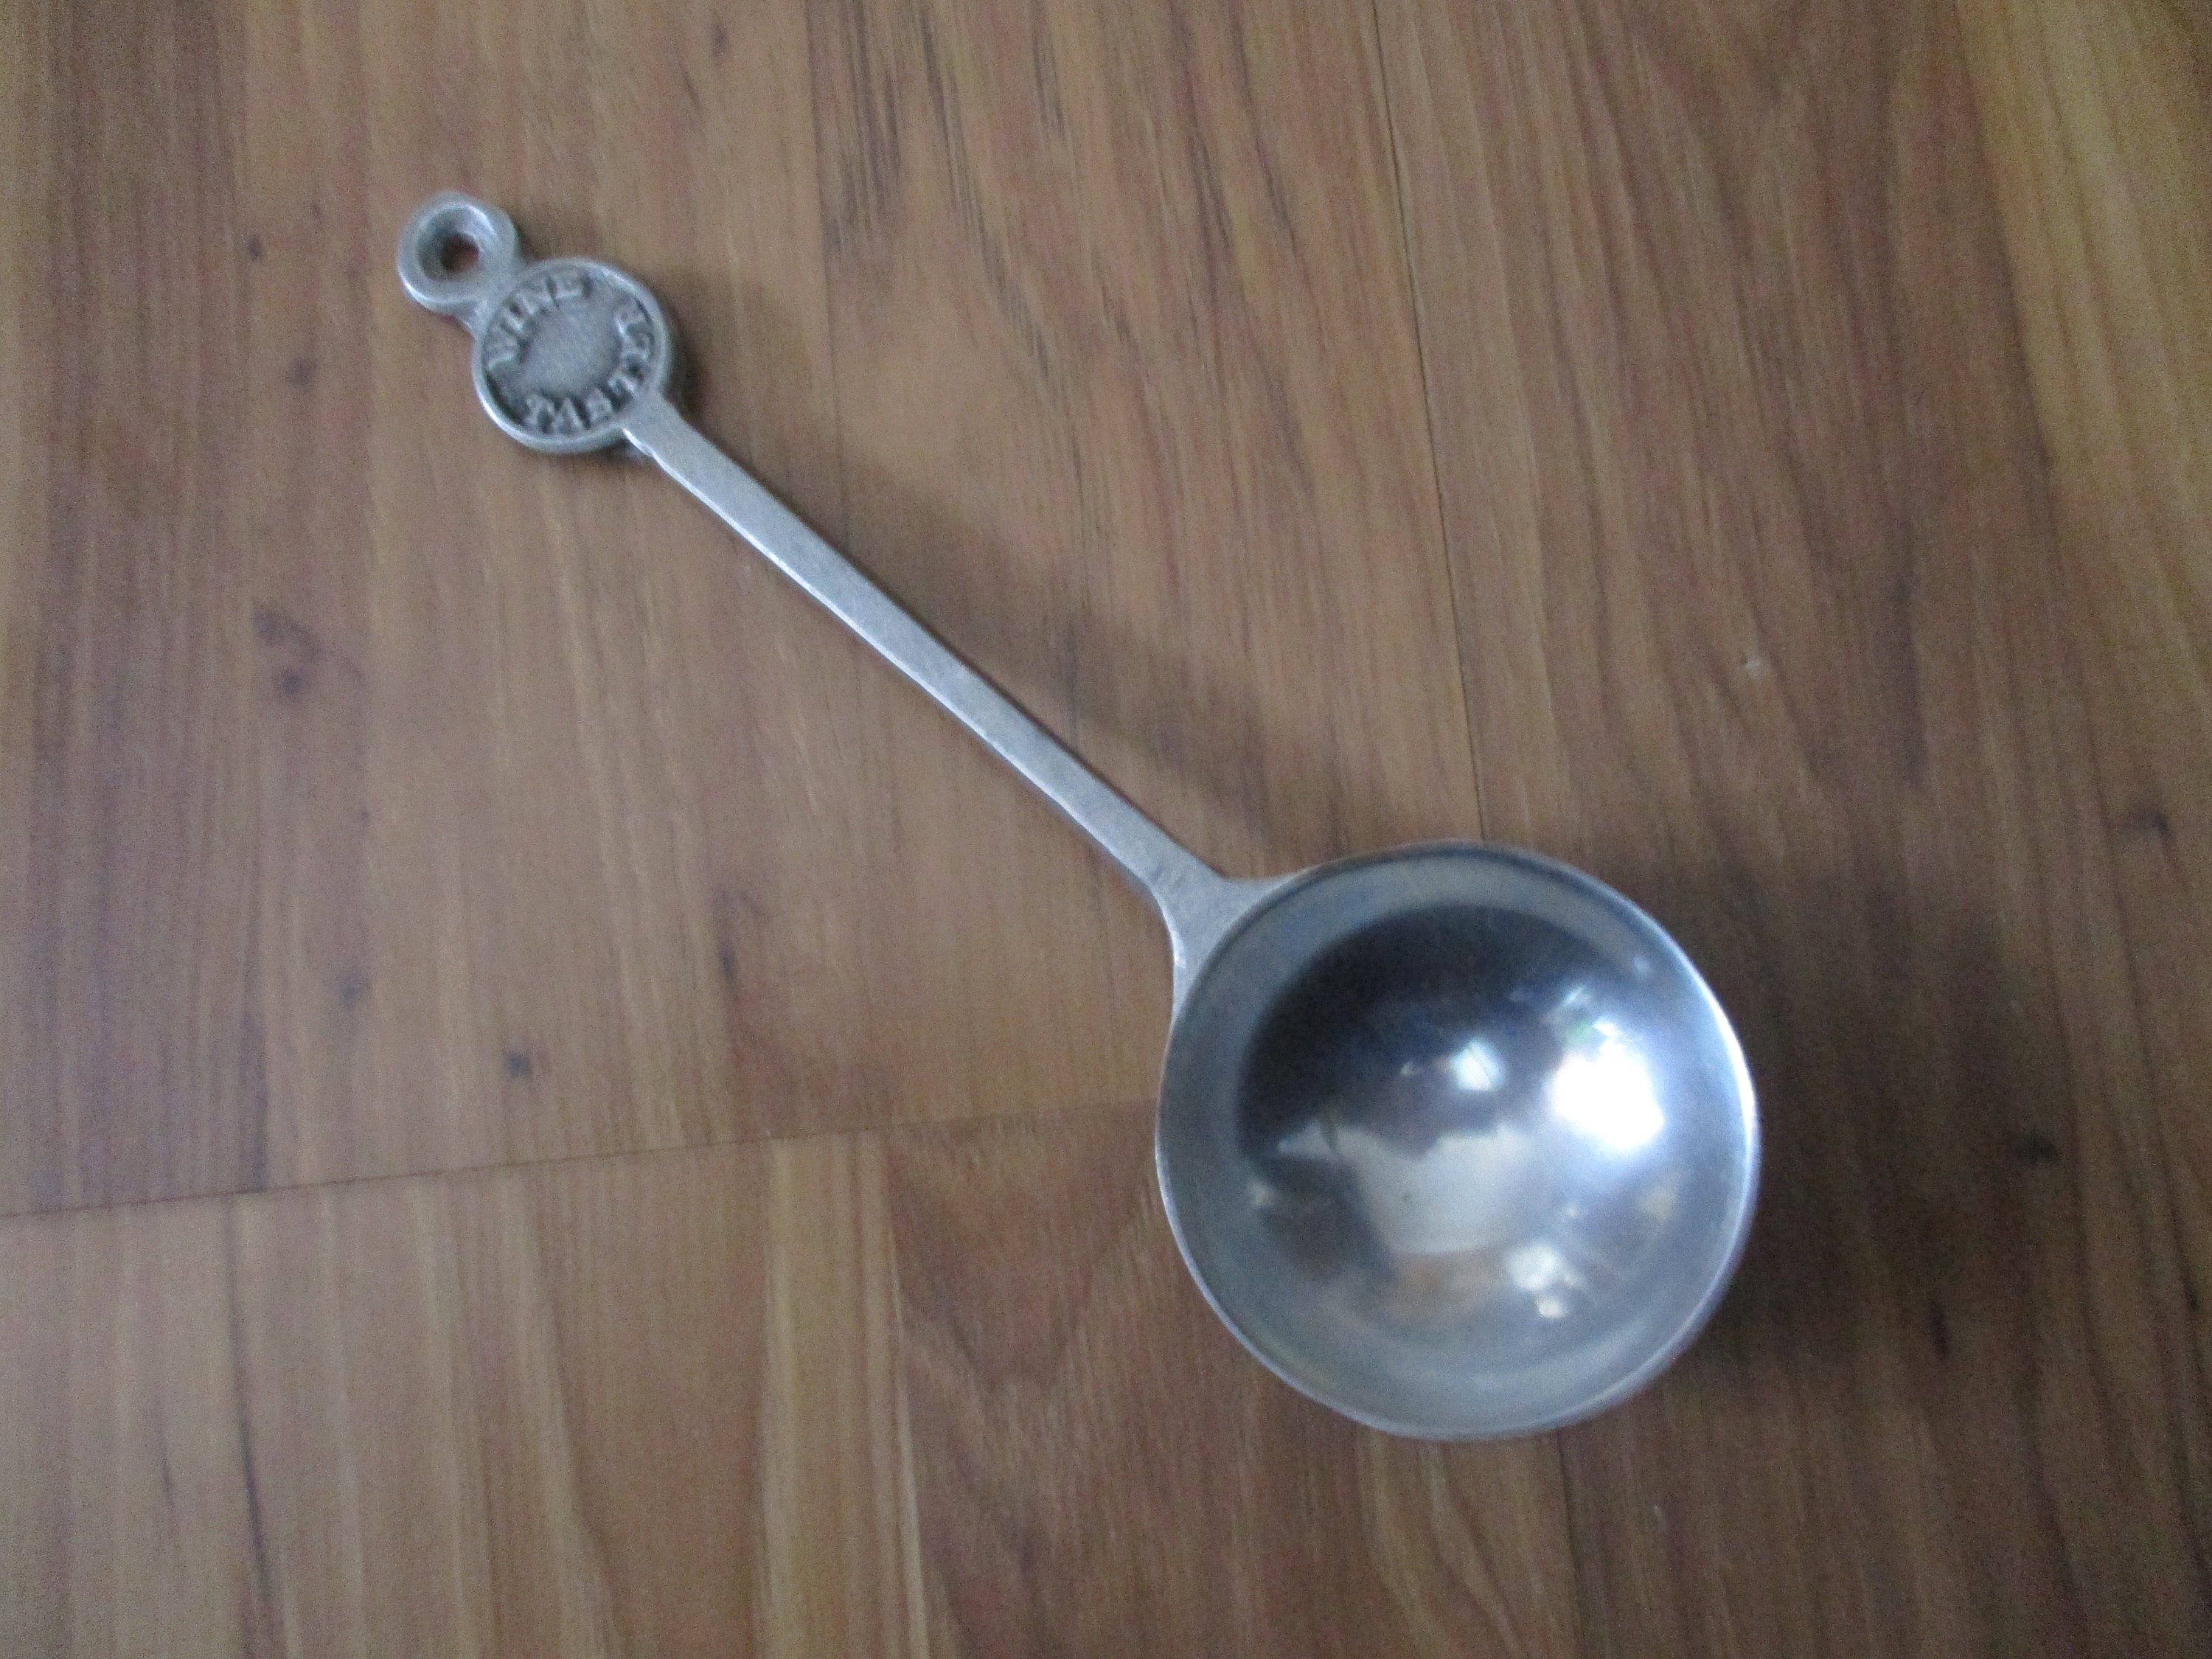 French Tasting Spoon - ASL Pewter